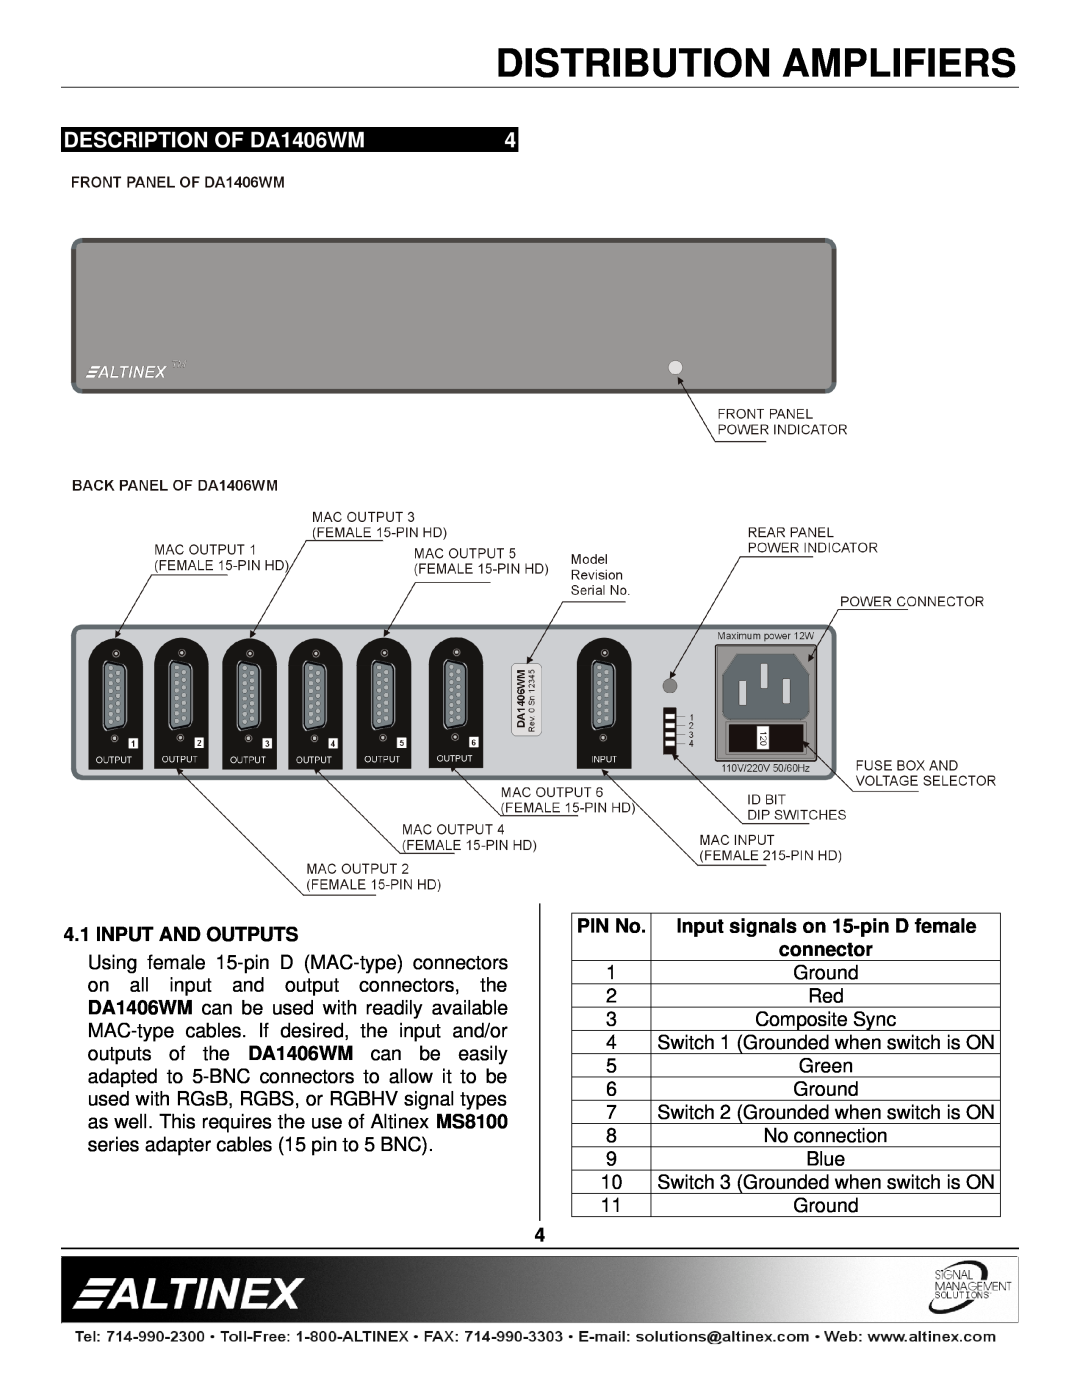 Altinex manual DESCRIPTION OF DA1406WM, Input And Outputs, PIN No, Input signals on 15-pinD female connector 